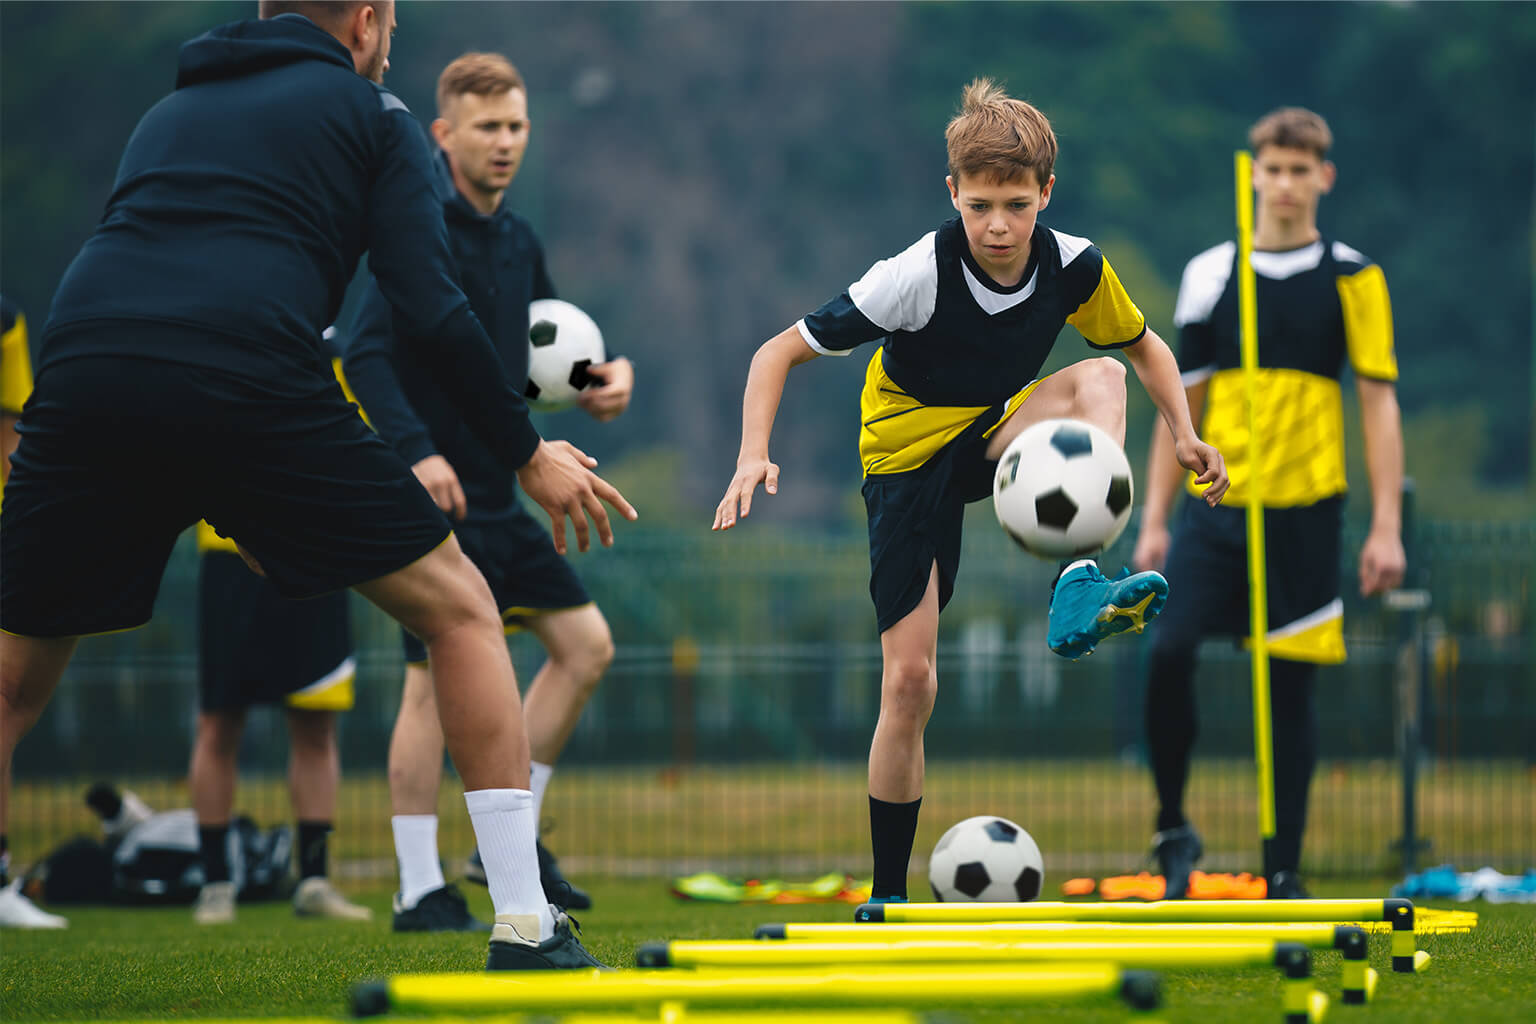 Maximize Your Performance: Exciting Soccer Drills for Young Athletes